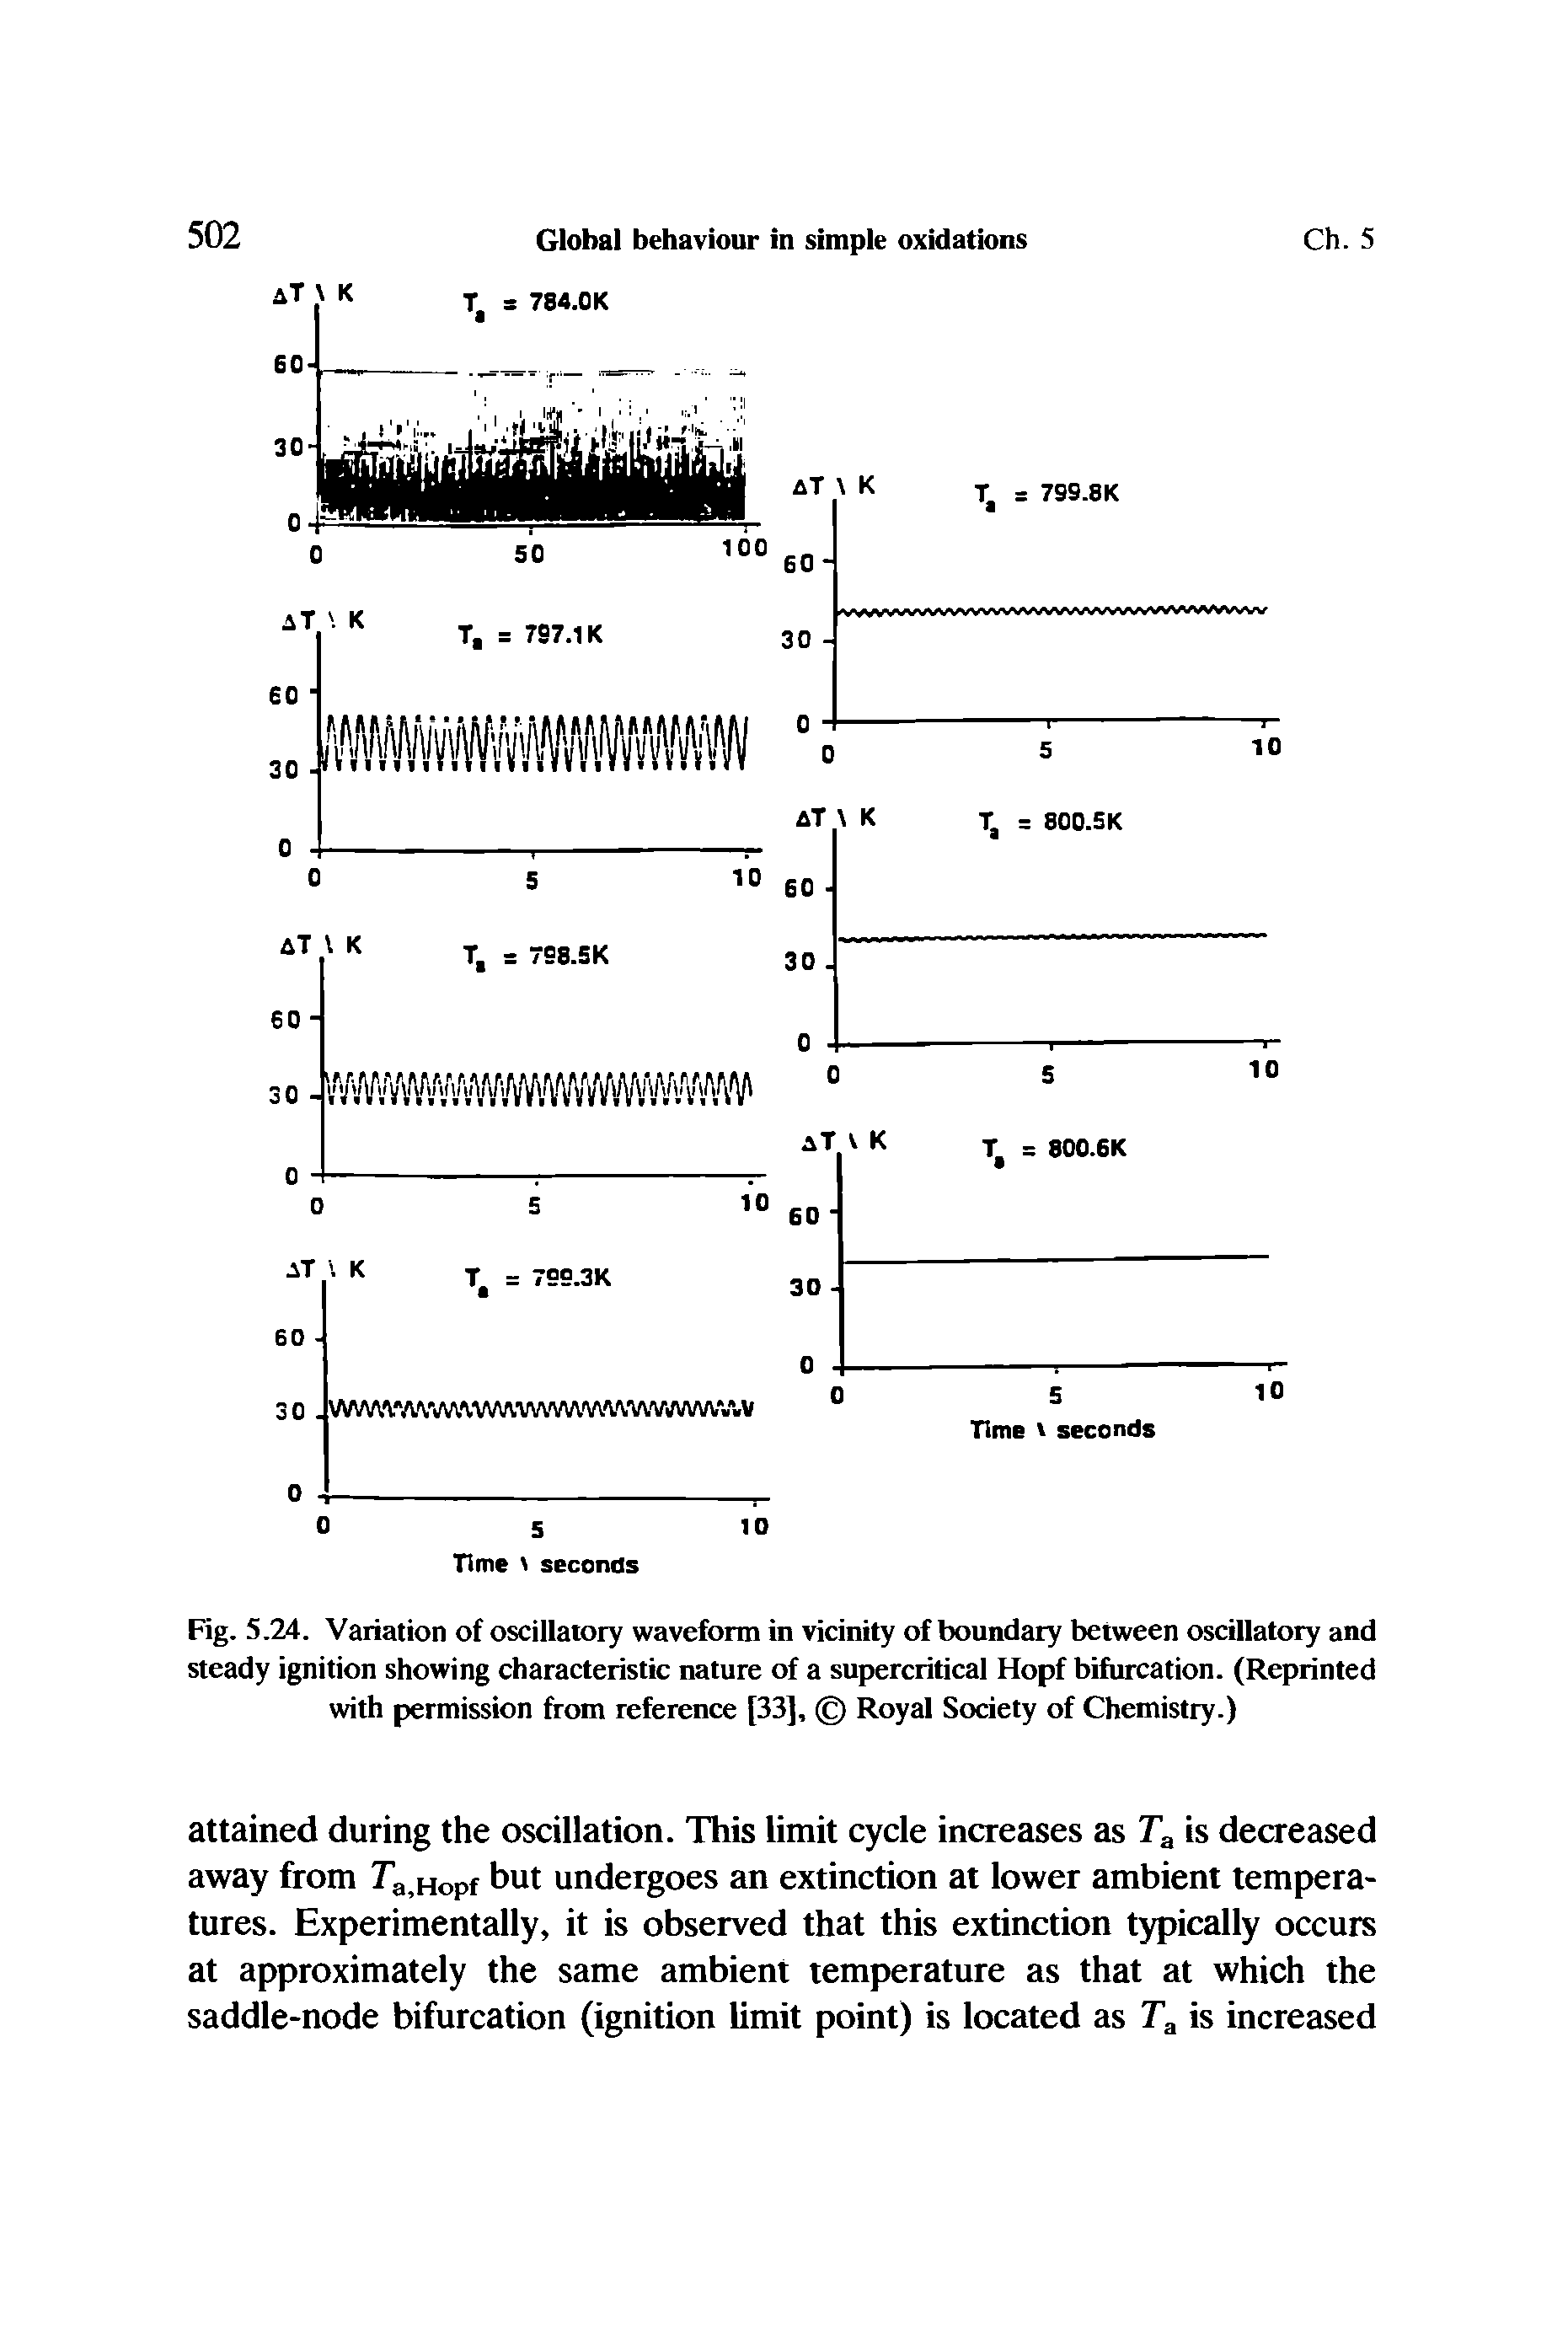 Fig. 5.24. Variation of oscillatory waveform in vicinity of boundary between oscillatory and steady ignition showing characteristic nature of a supercritical Hopf bifurcation. (Reprinted with permission from reference [33], Royal Society of Chemistry.)...